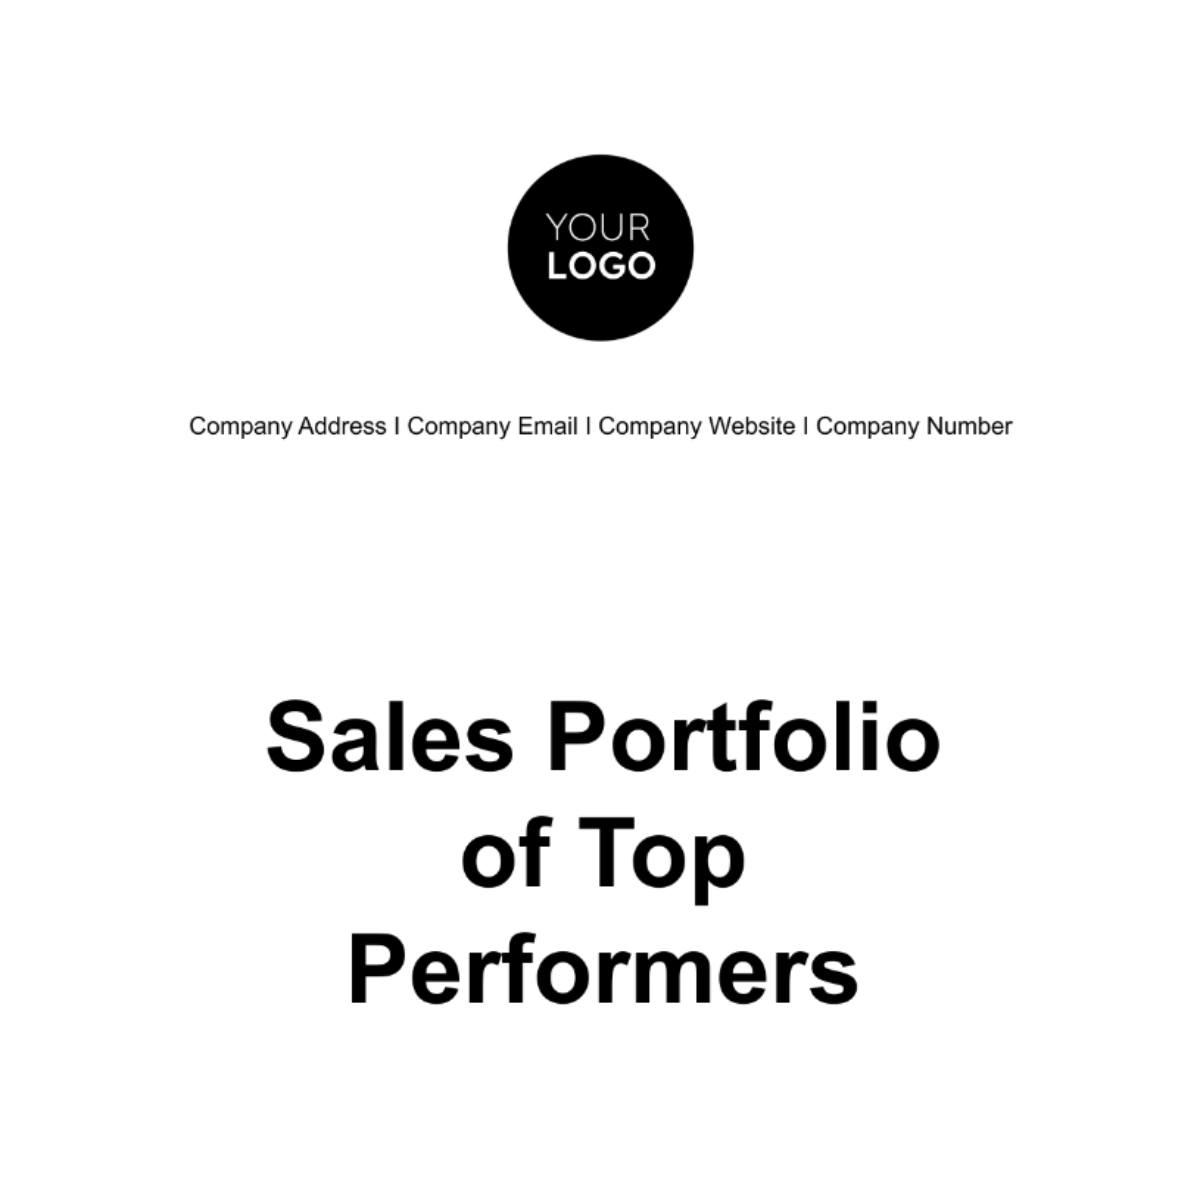 Free Sales Portfolio of Top Performers Template